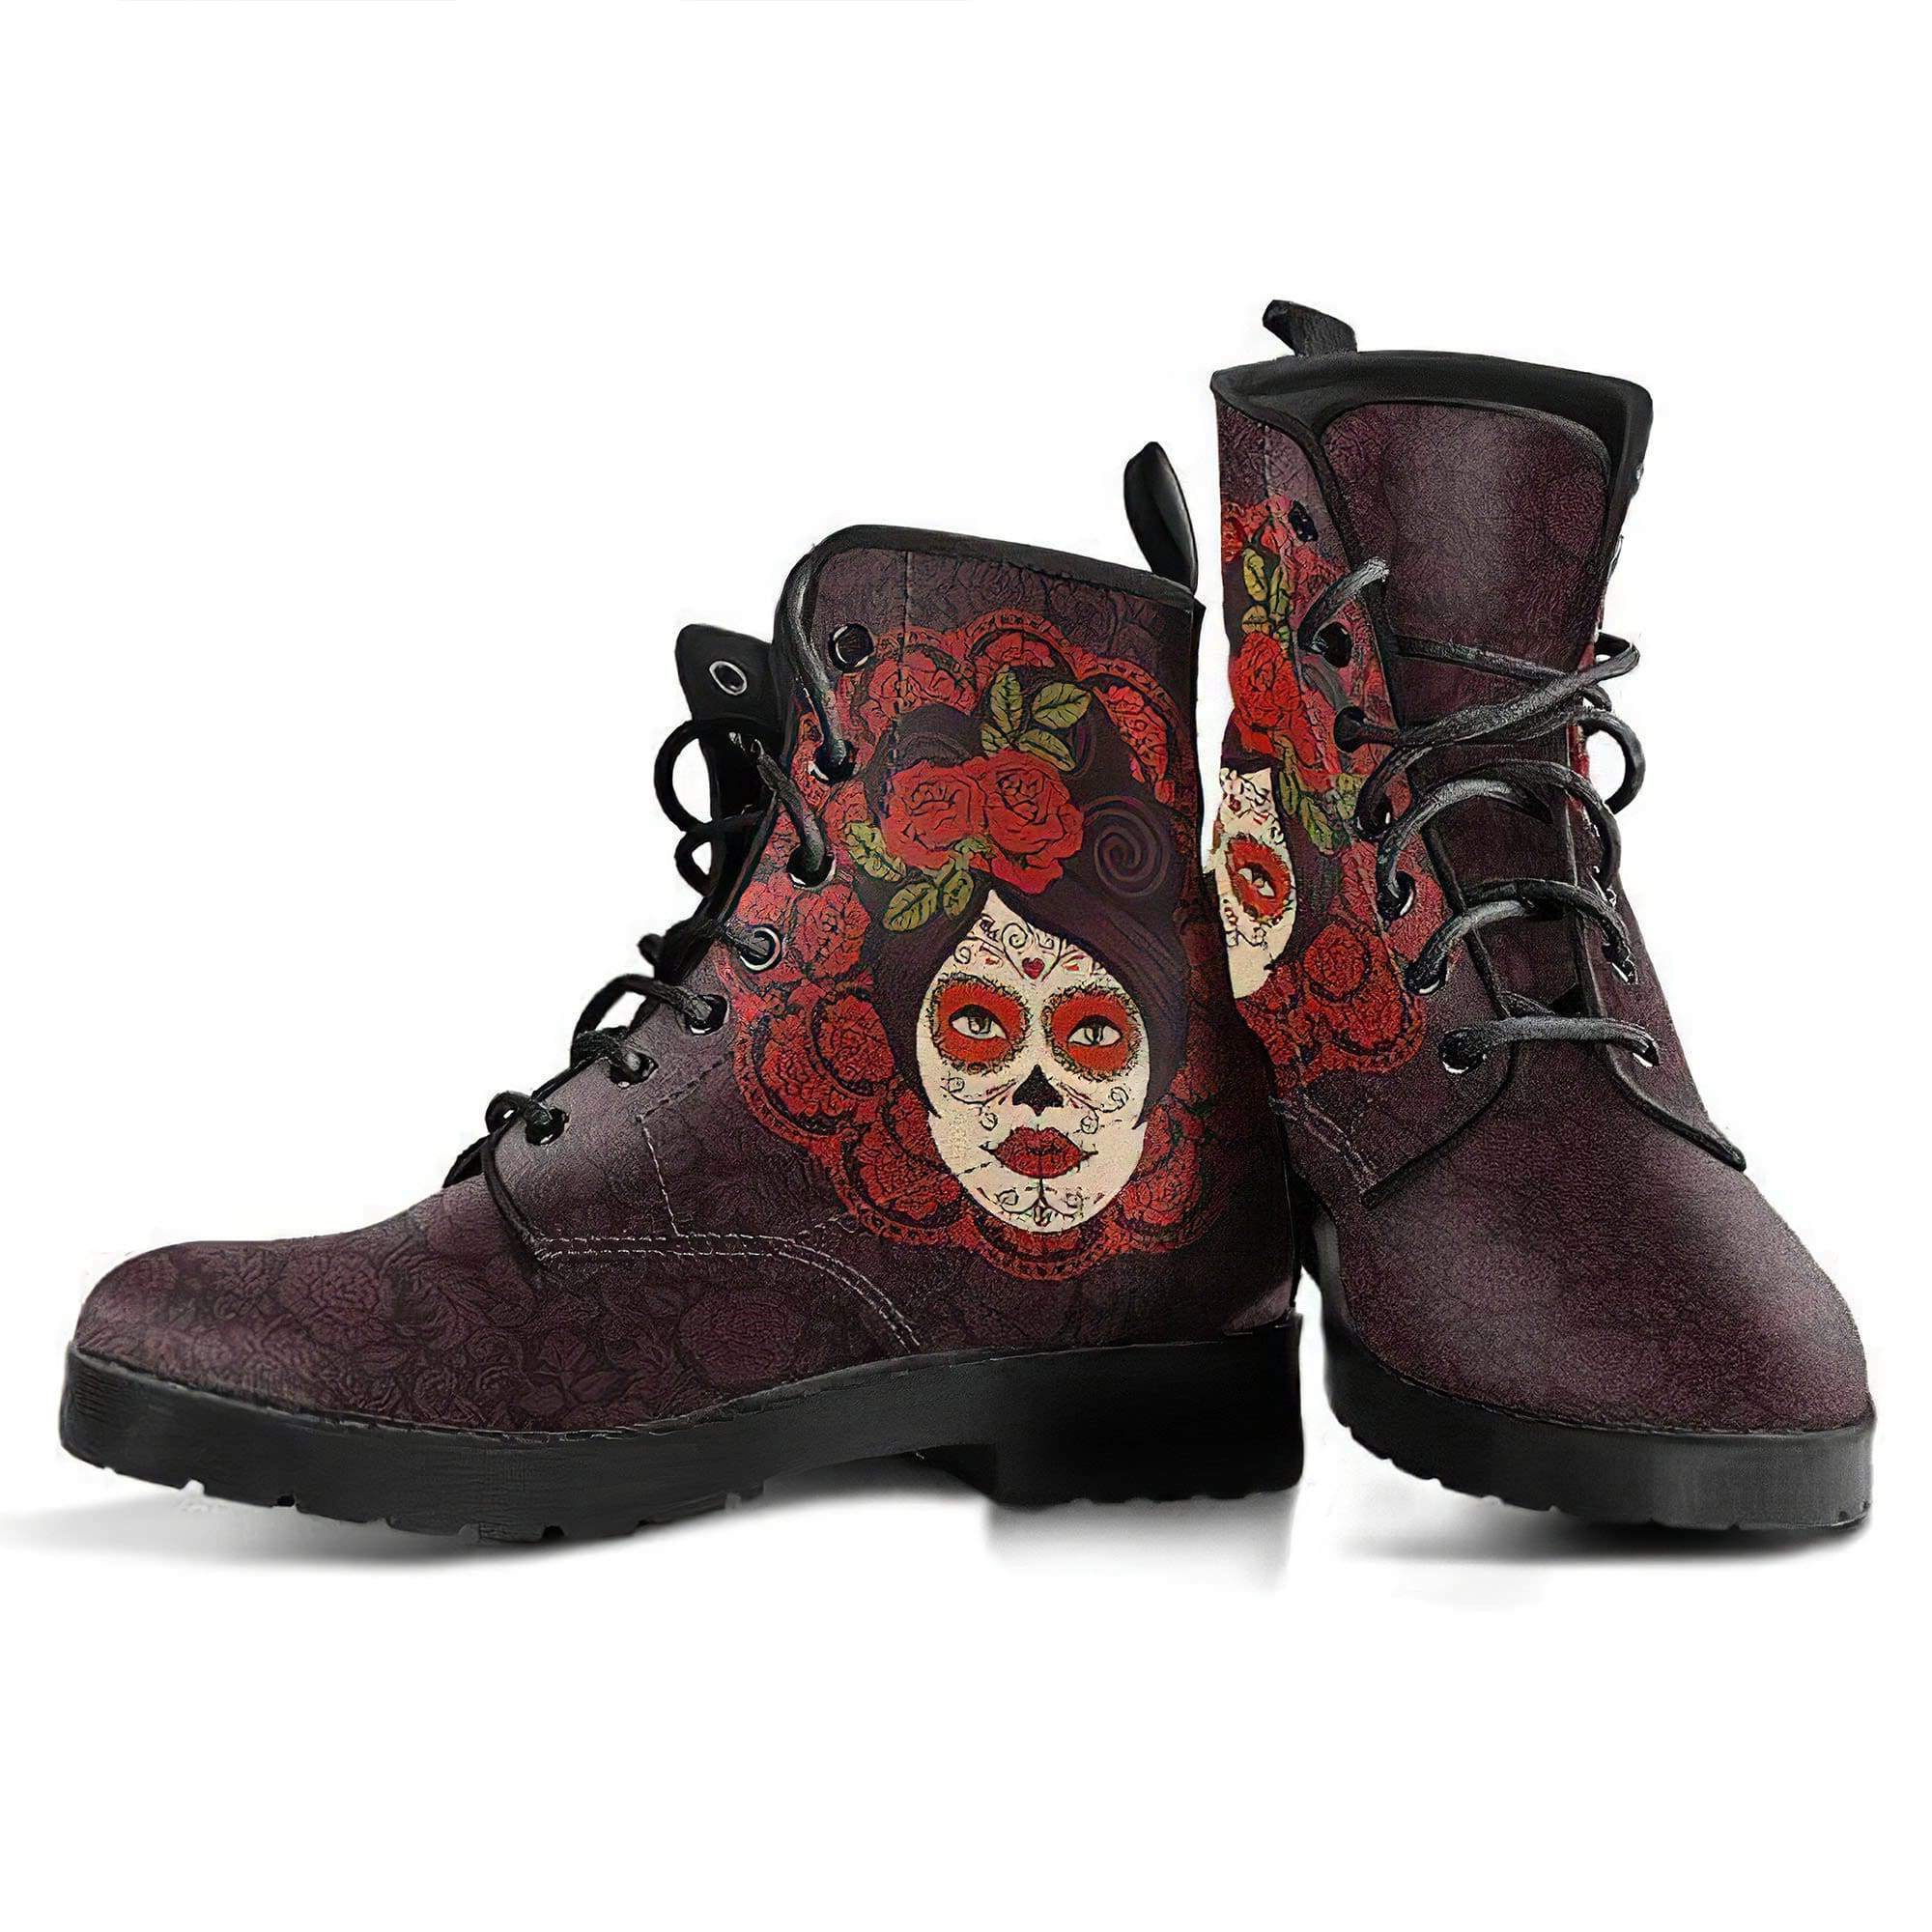 mexican-skull-girl-women-s-leather-boots-women-s-leather-boots-12051910328381.jpg